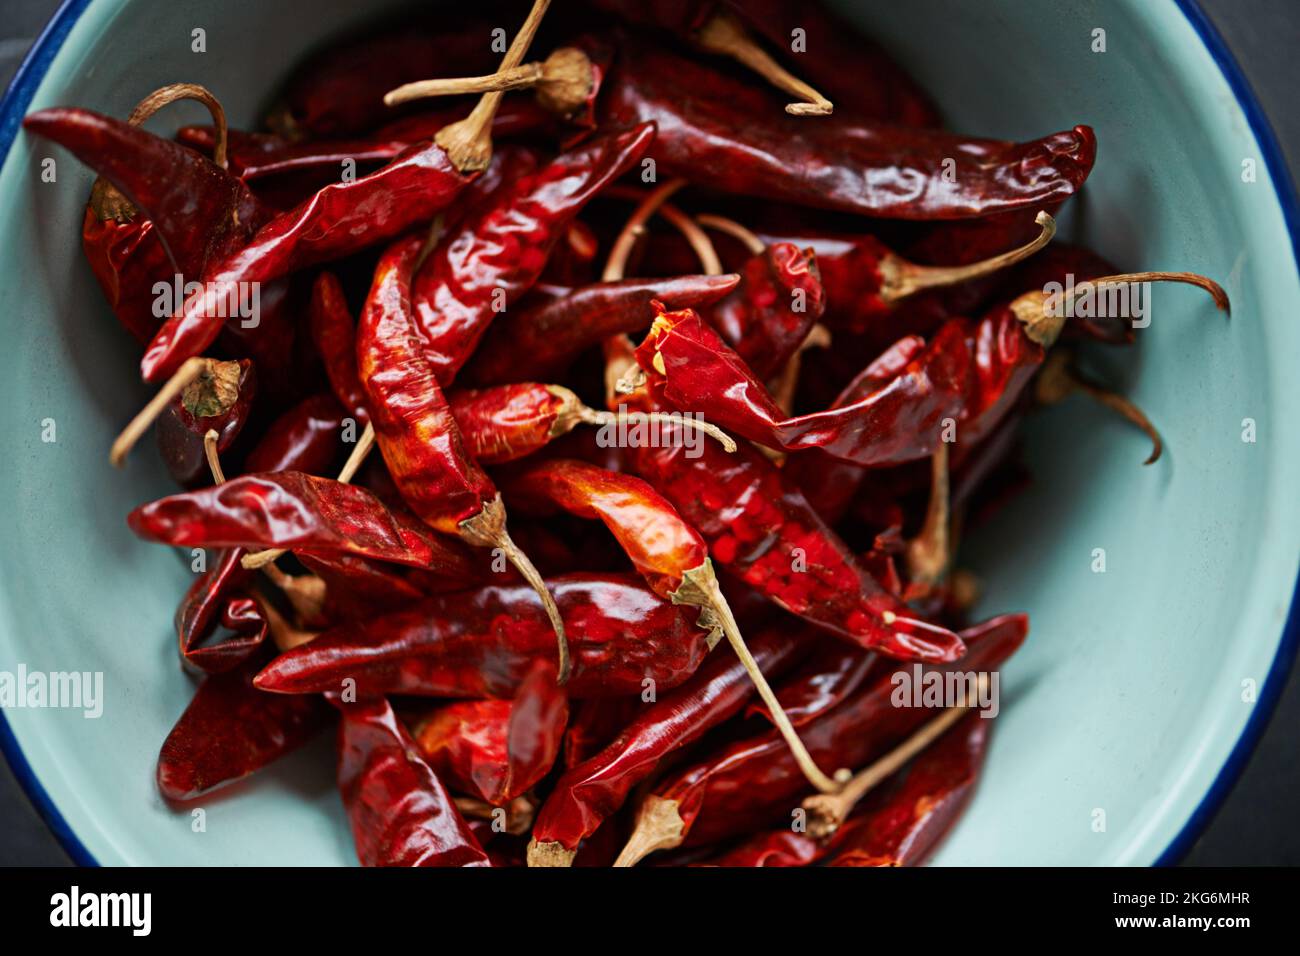 Time for a good old chili con carne. High angle shot of dried red chillies in a bowl on a kitchen counter. Stock Photo